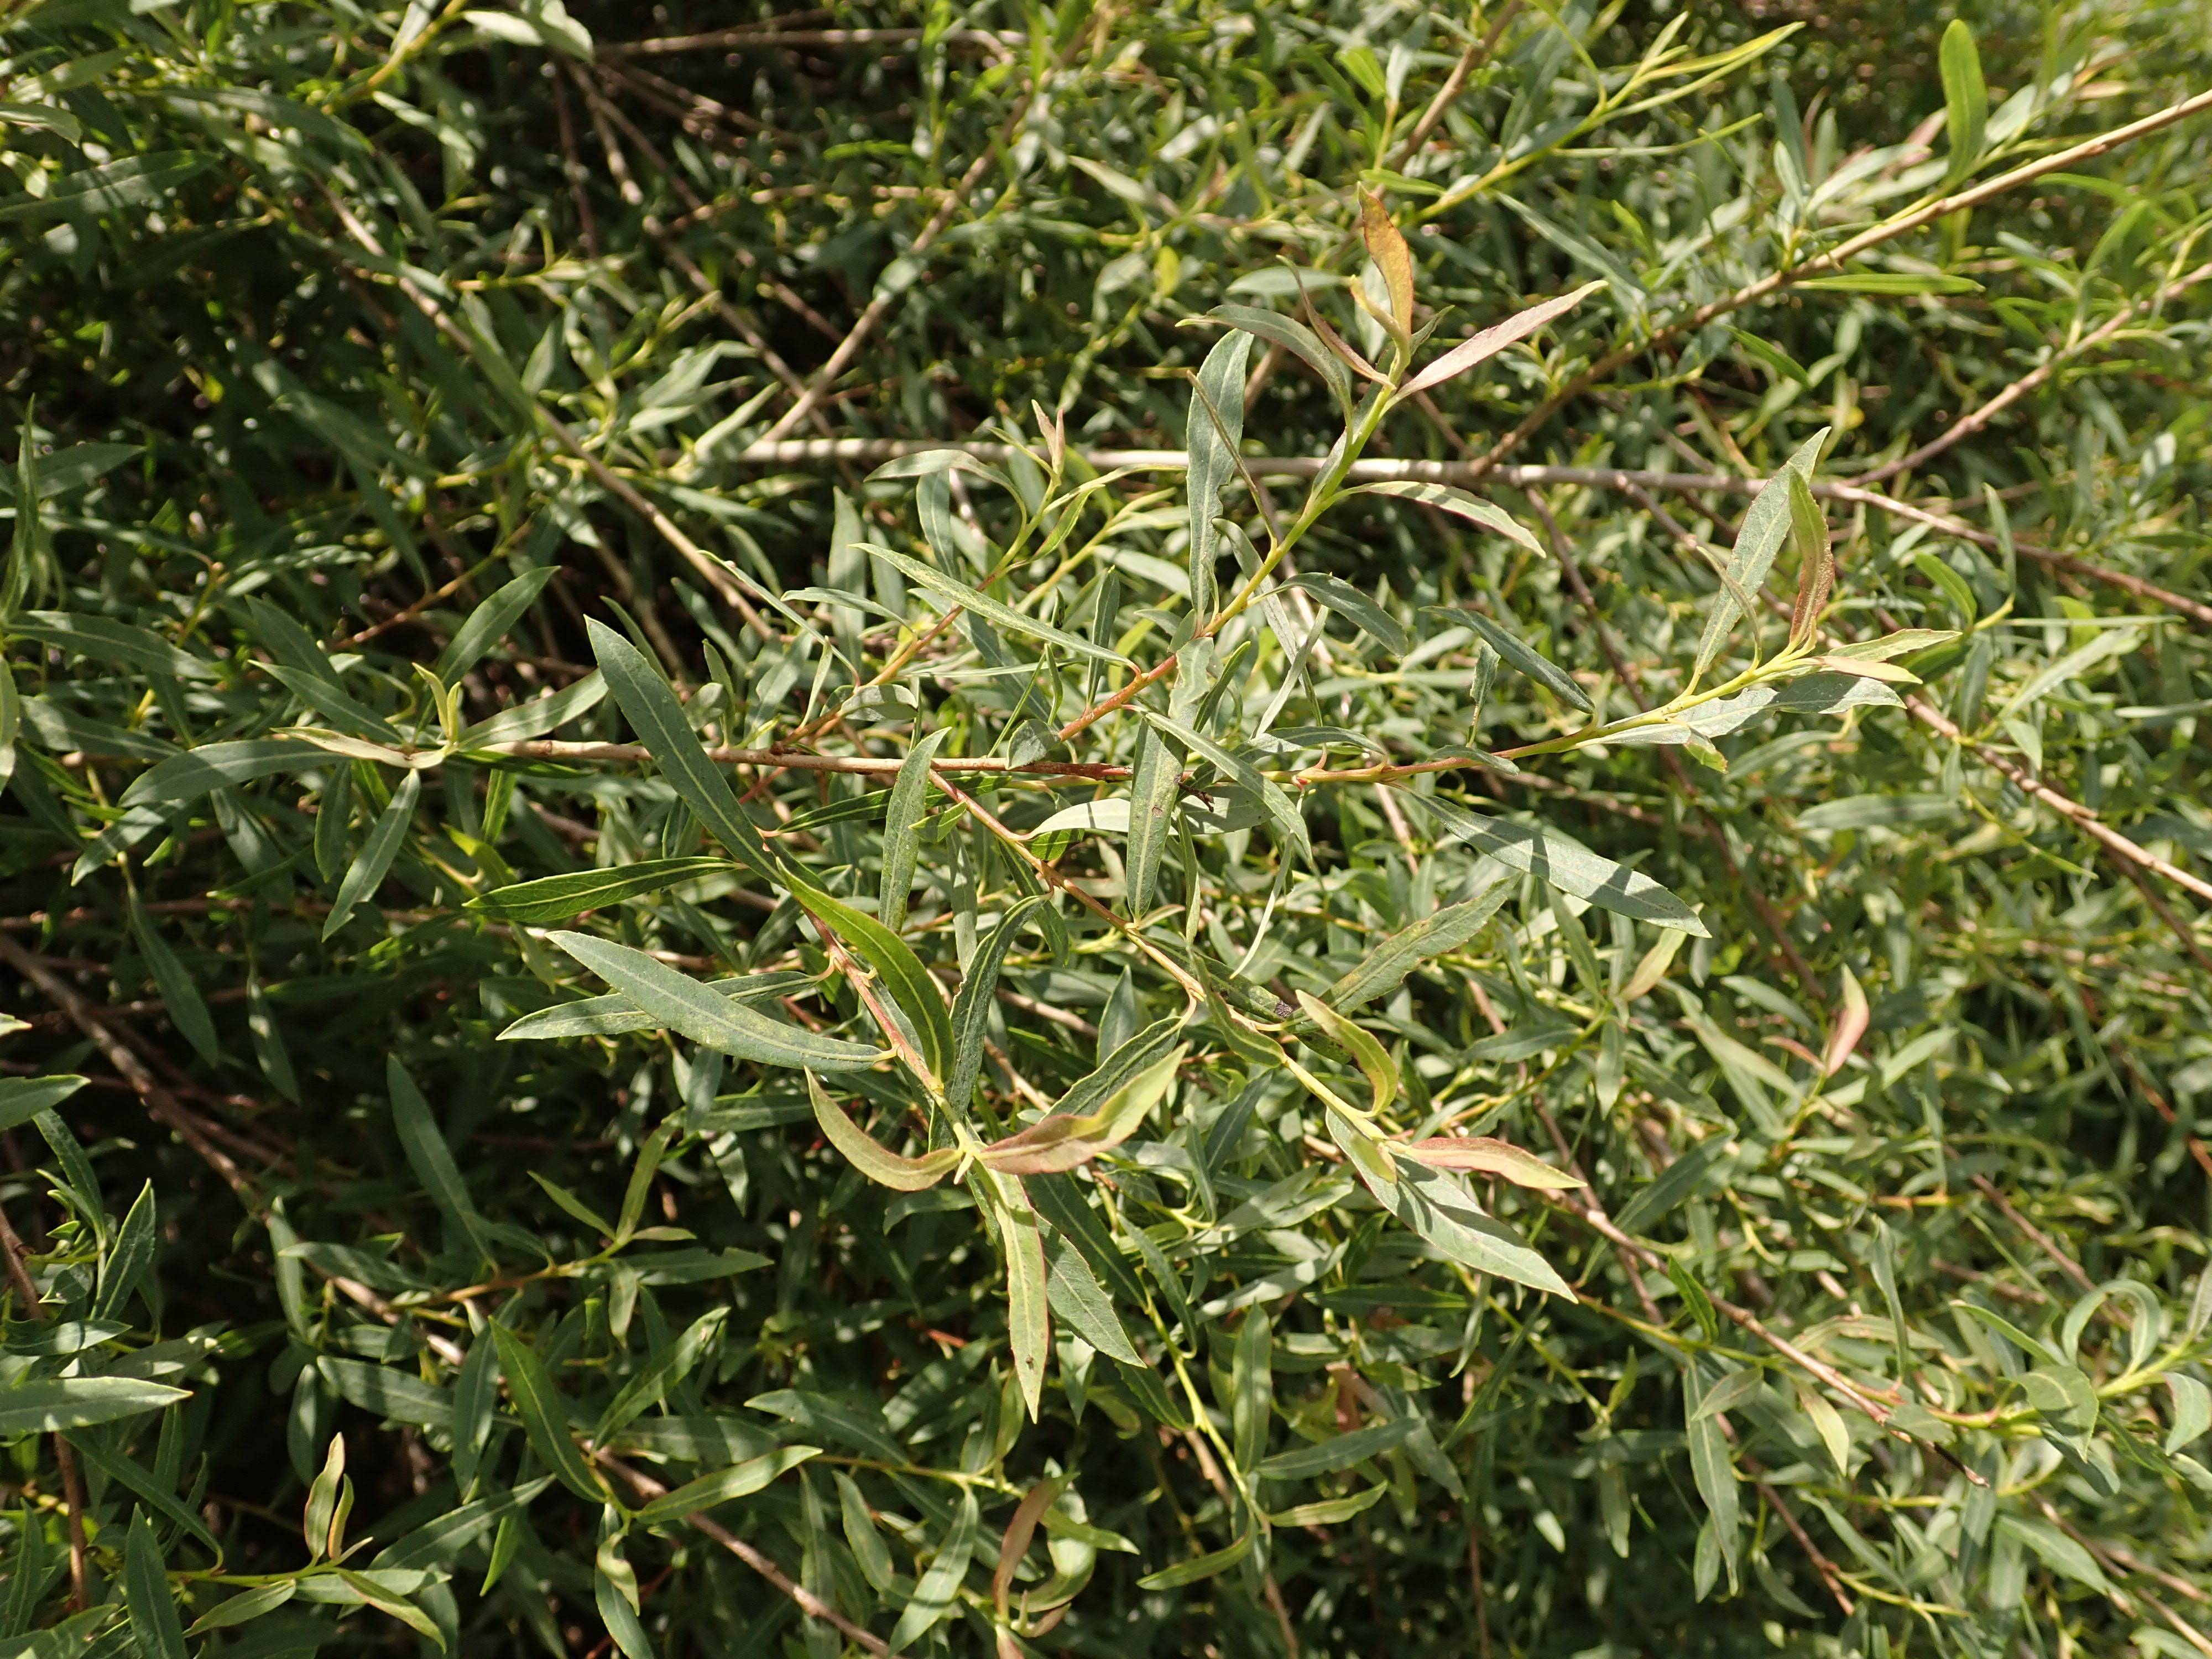 yellow-green leaves and light-brown stems